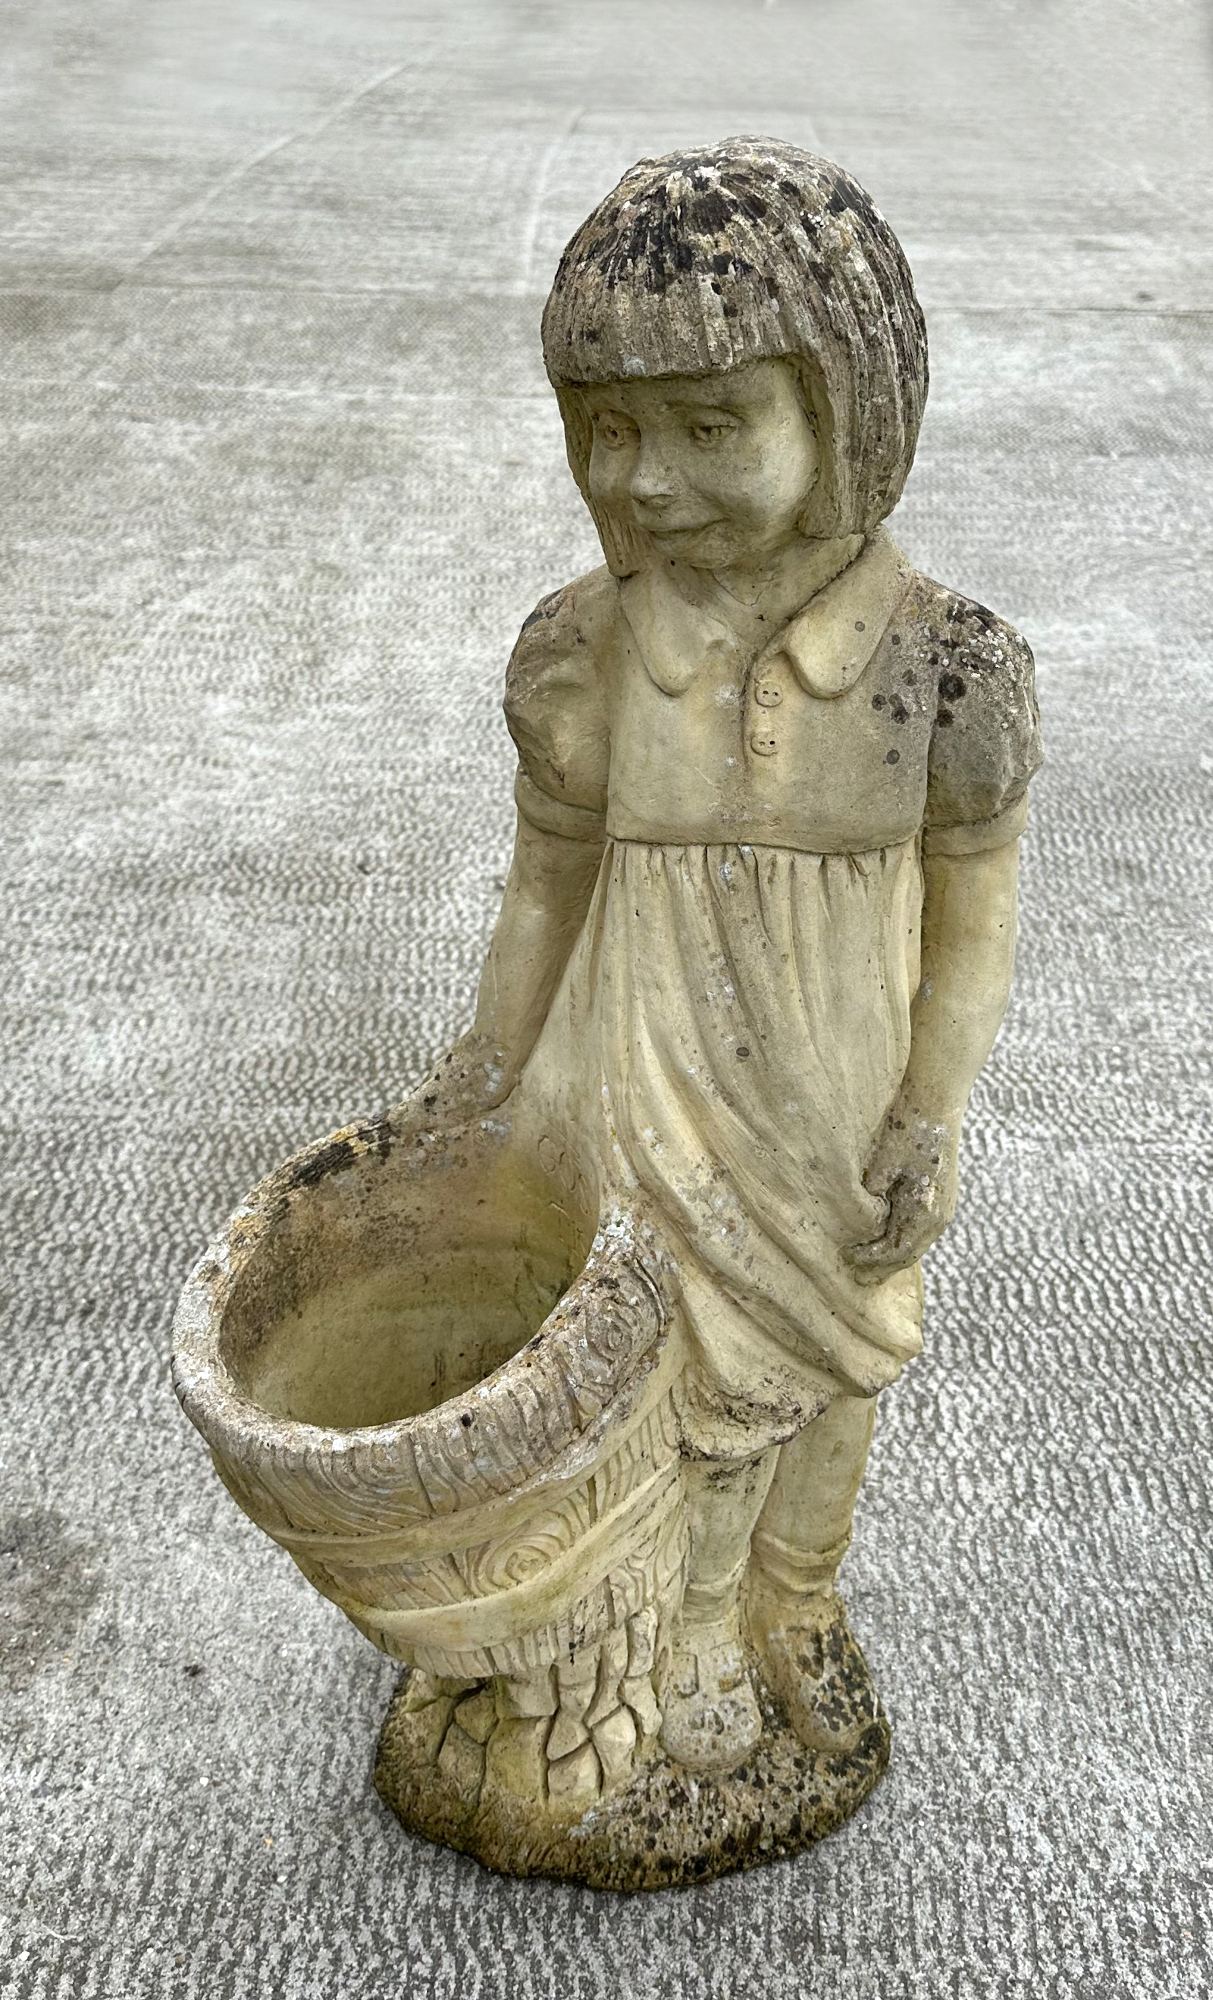 A well weathered stoneware garden ornament, depicting a young girl holding a barrel, 83cm high.